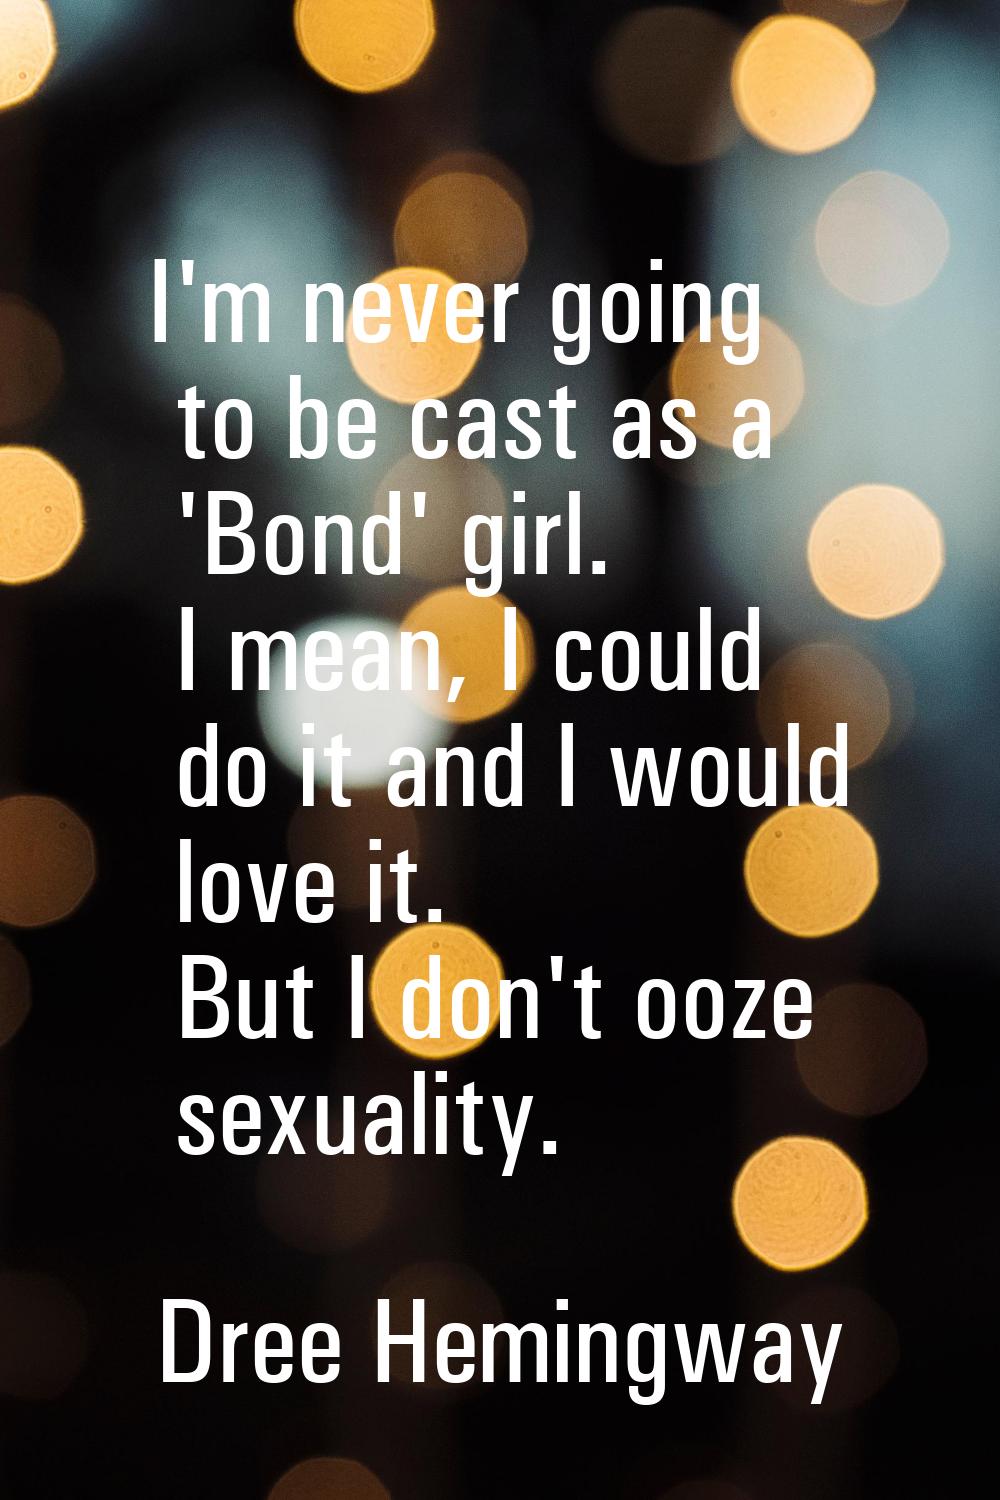 I'm never going to be cast as a 'Bond' girl. I mean, I could do it and I would love it. But I don't